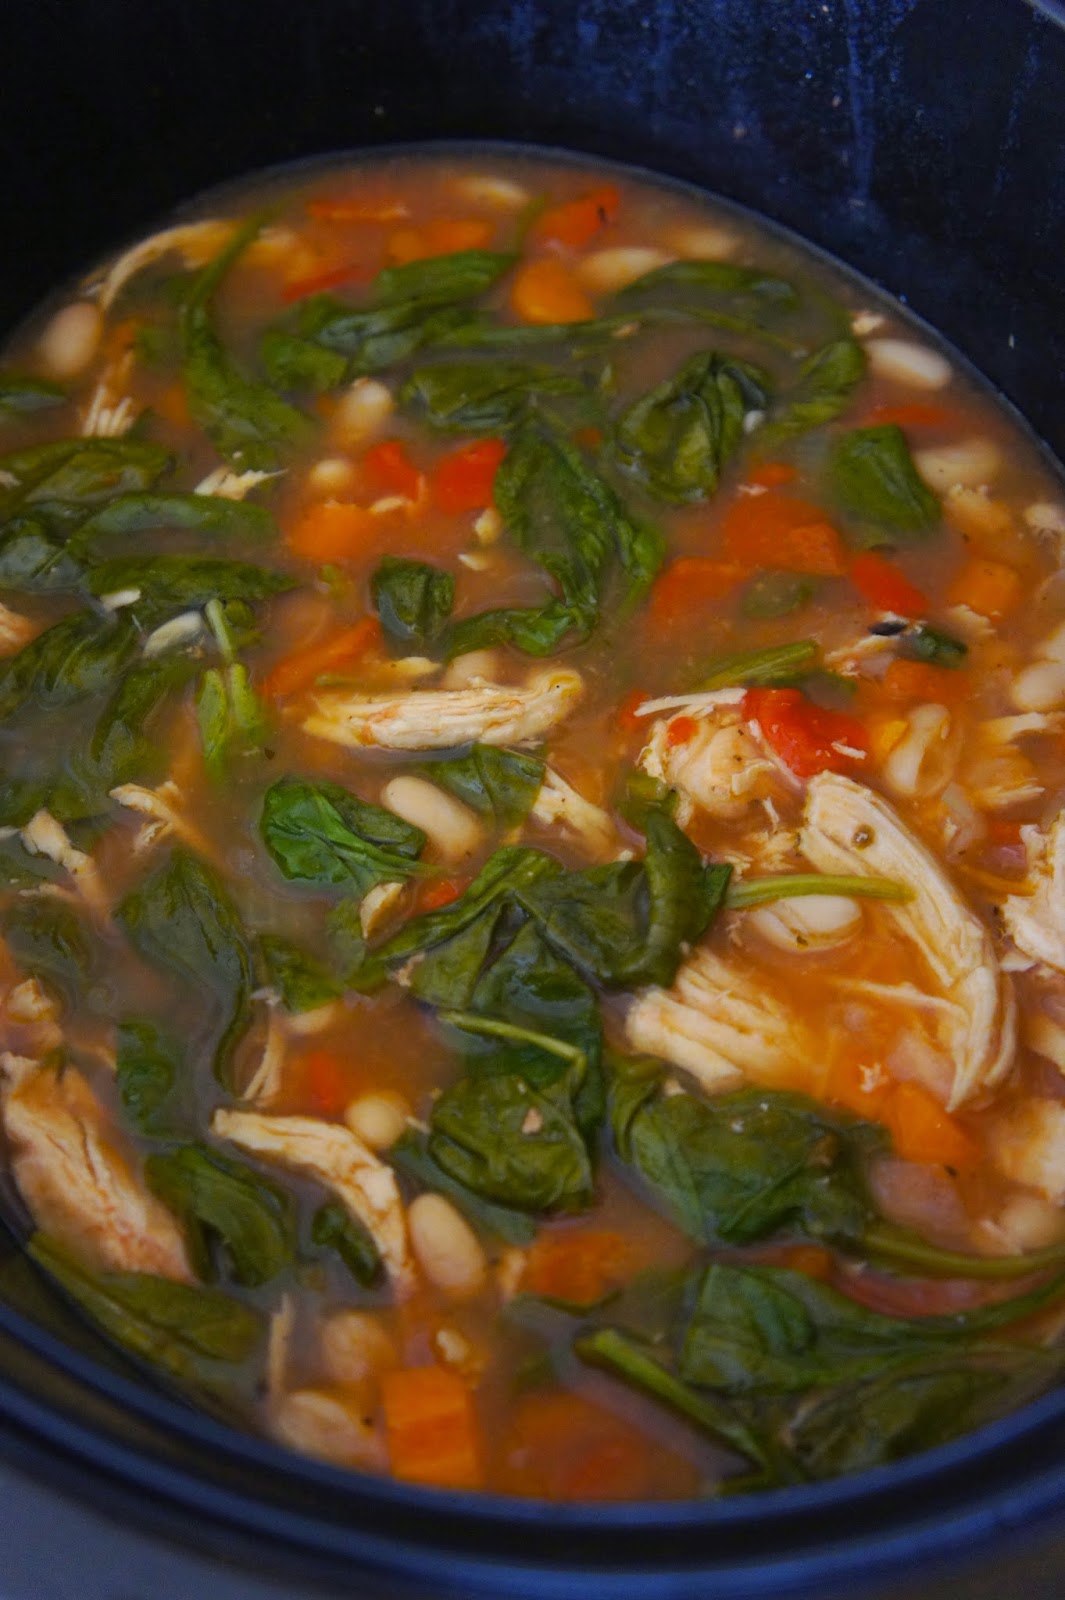 Savory Sweet and Satisfying: Crock Pot Tuscan Chicken Soup